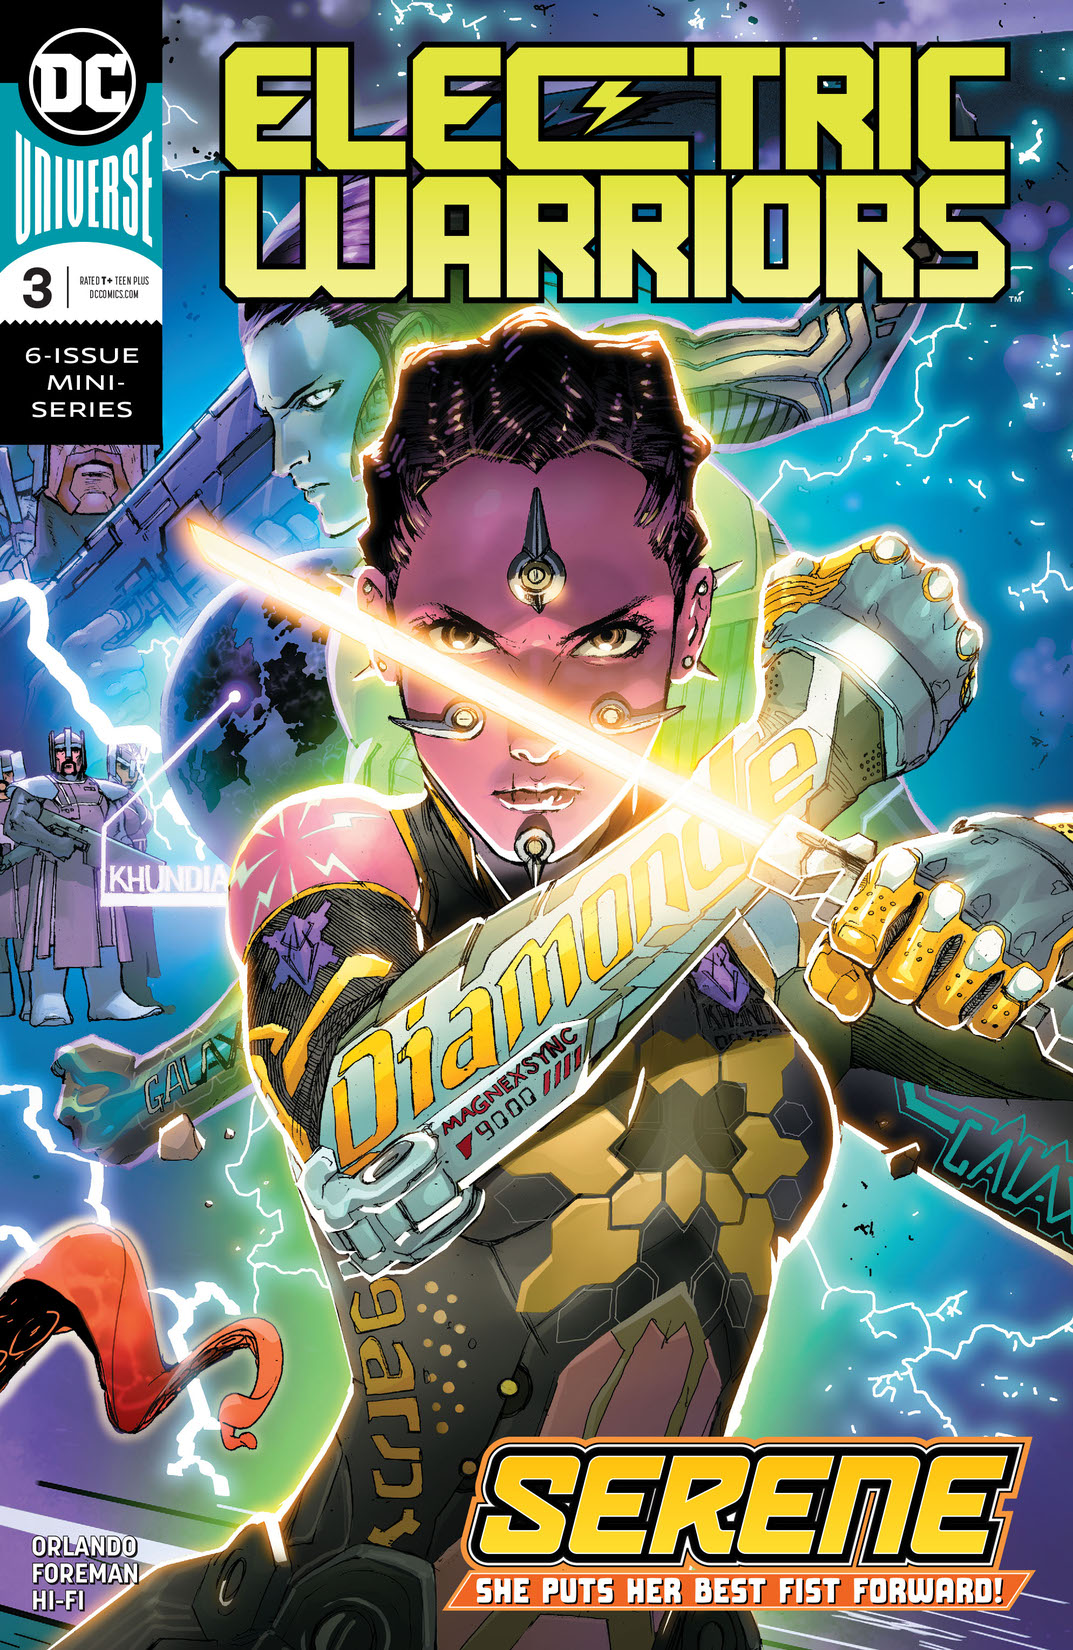 Electric Warriors #3 preview images